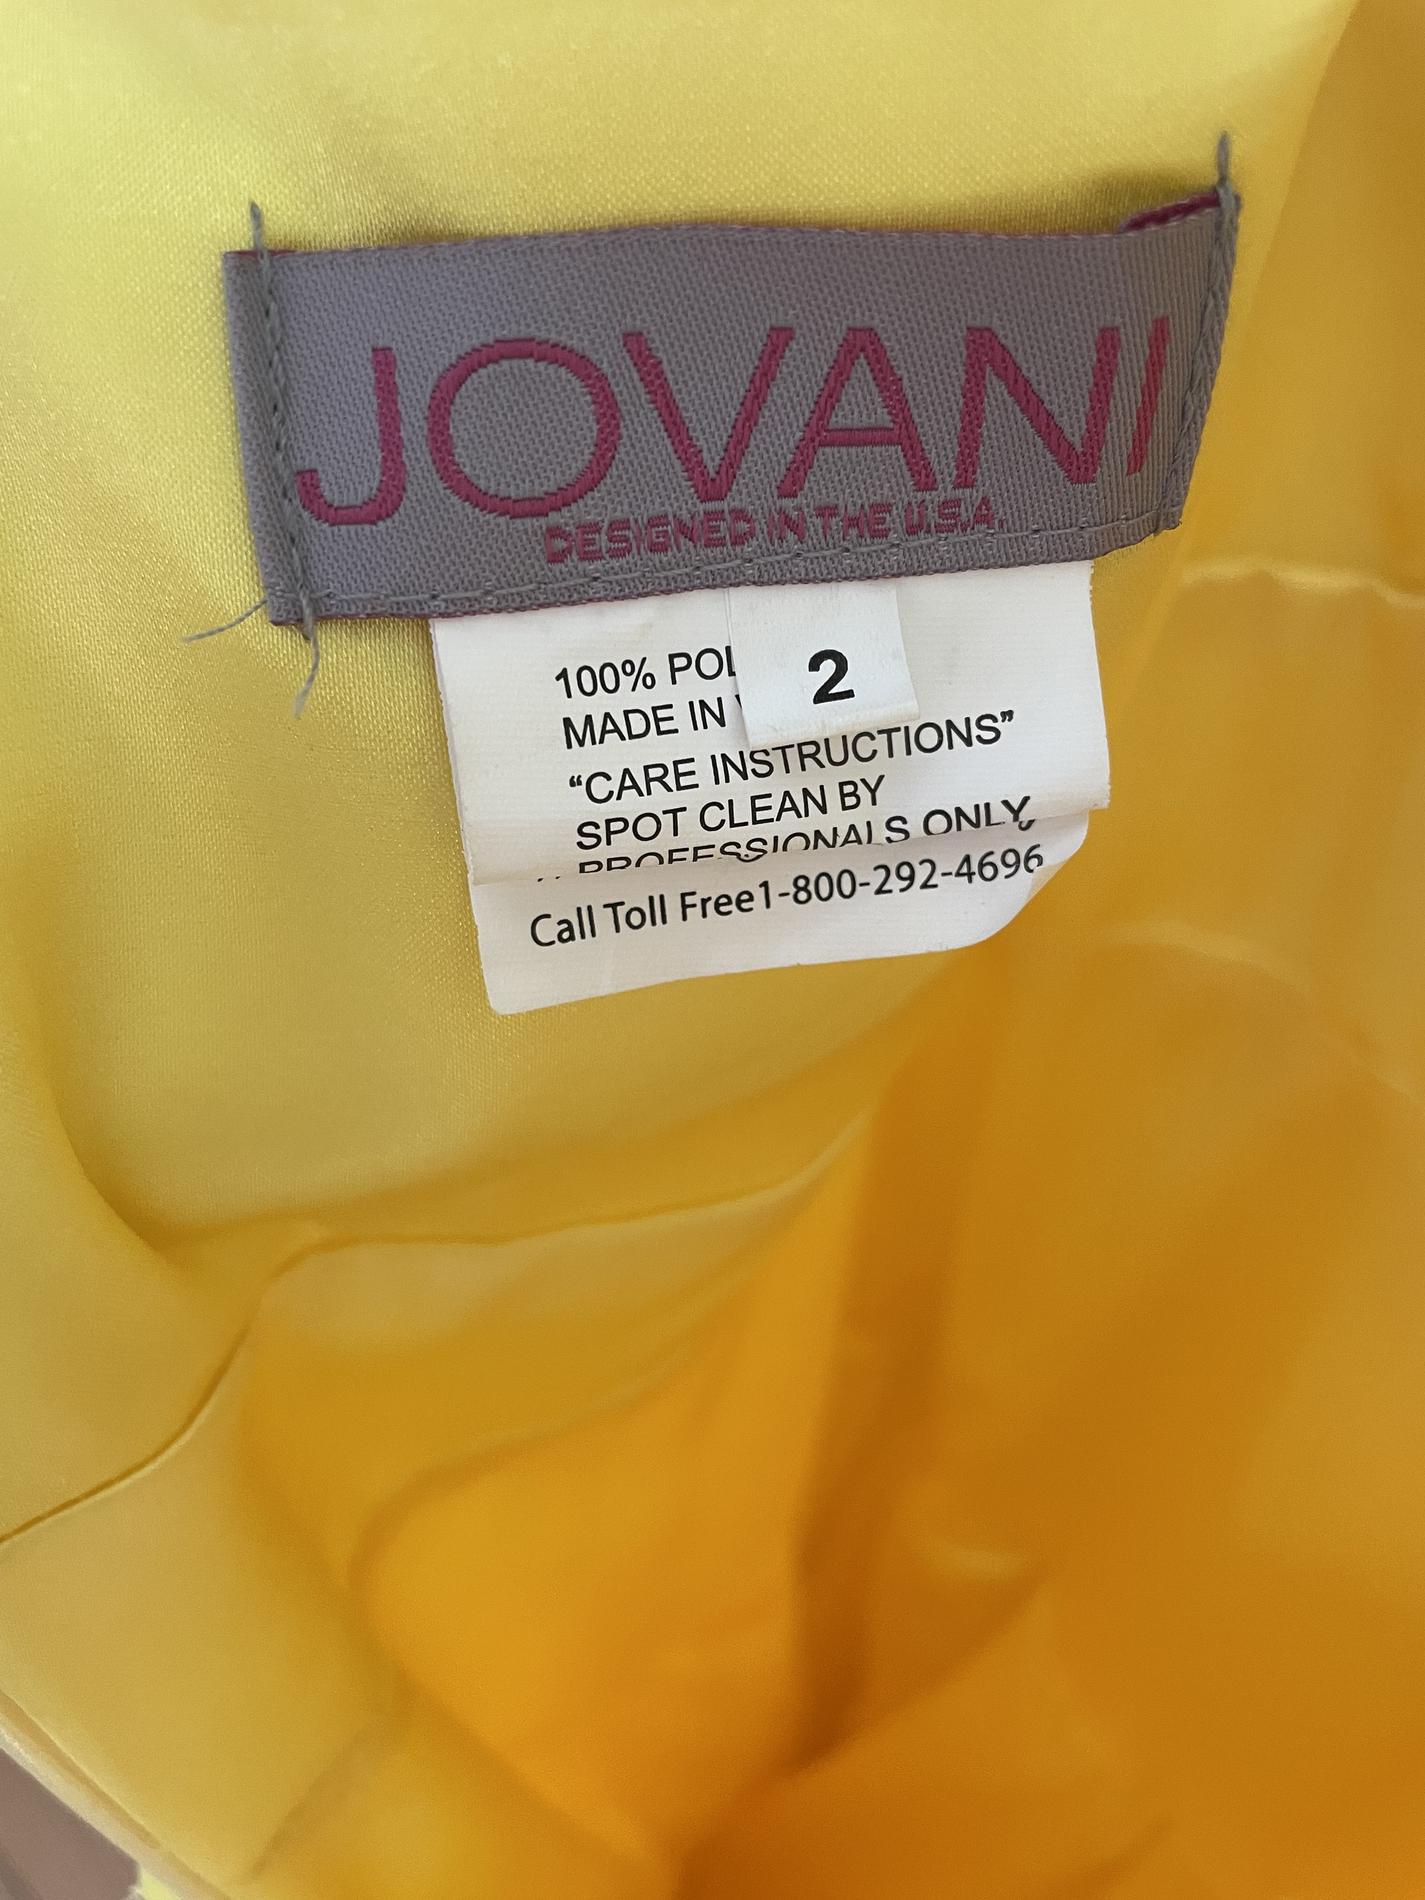 Jovani Yellow Size 2 Pageant Prom Ball gown on Queenly